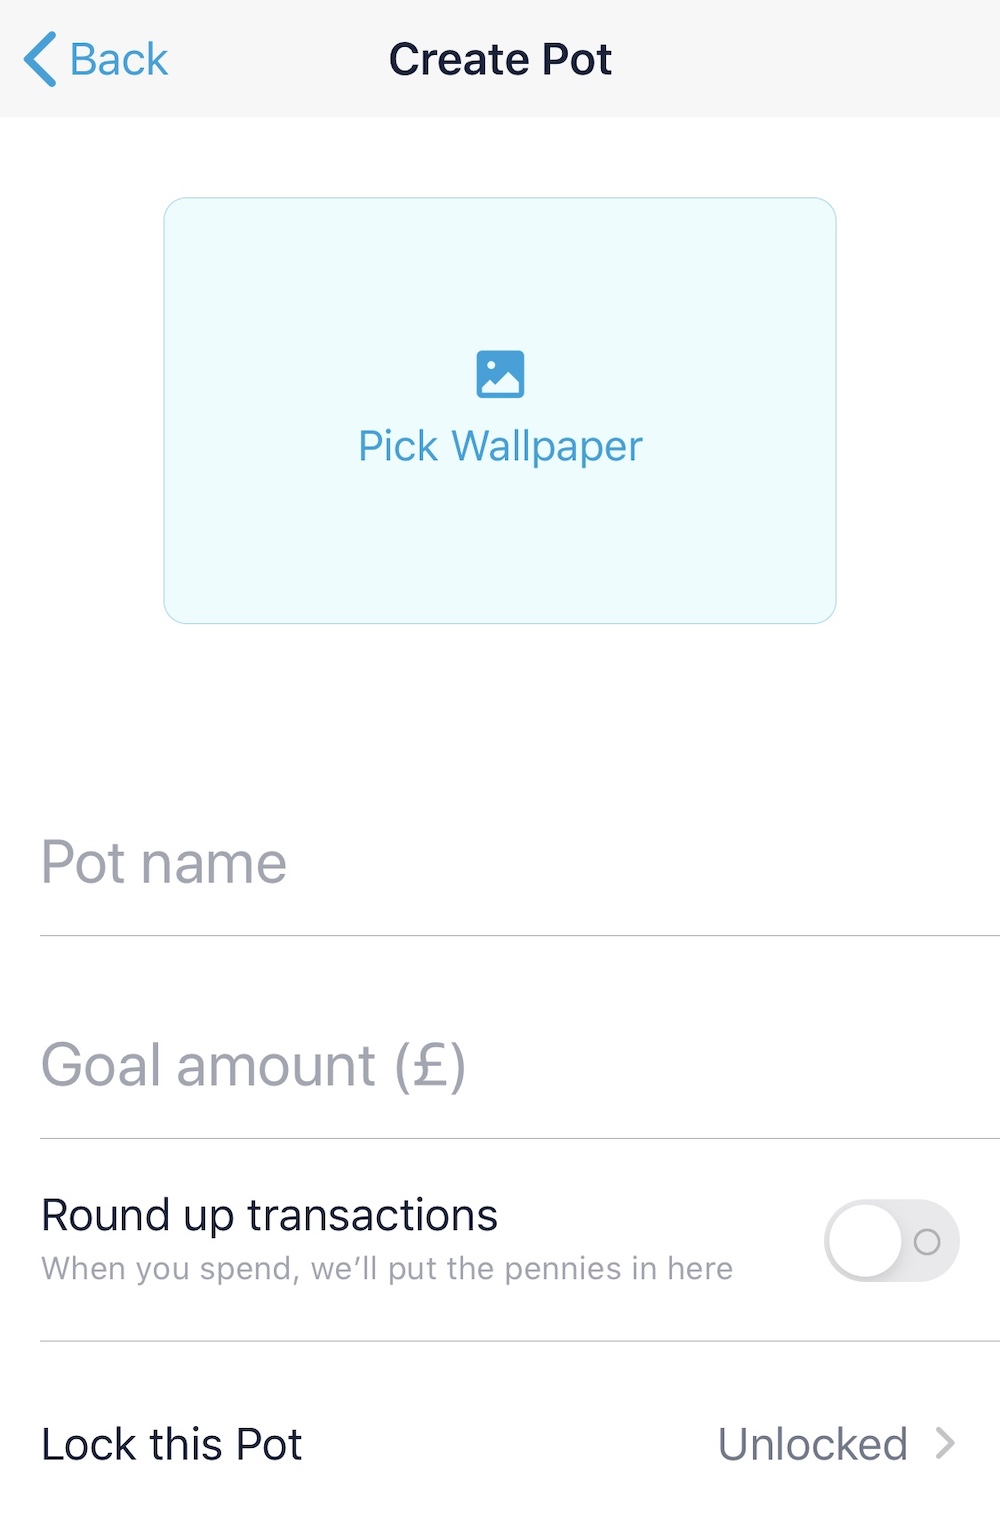 Creating a pot in Monzo